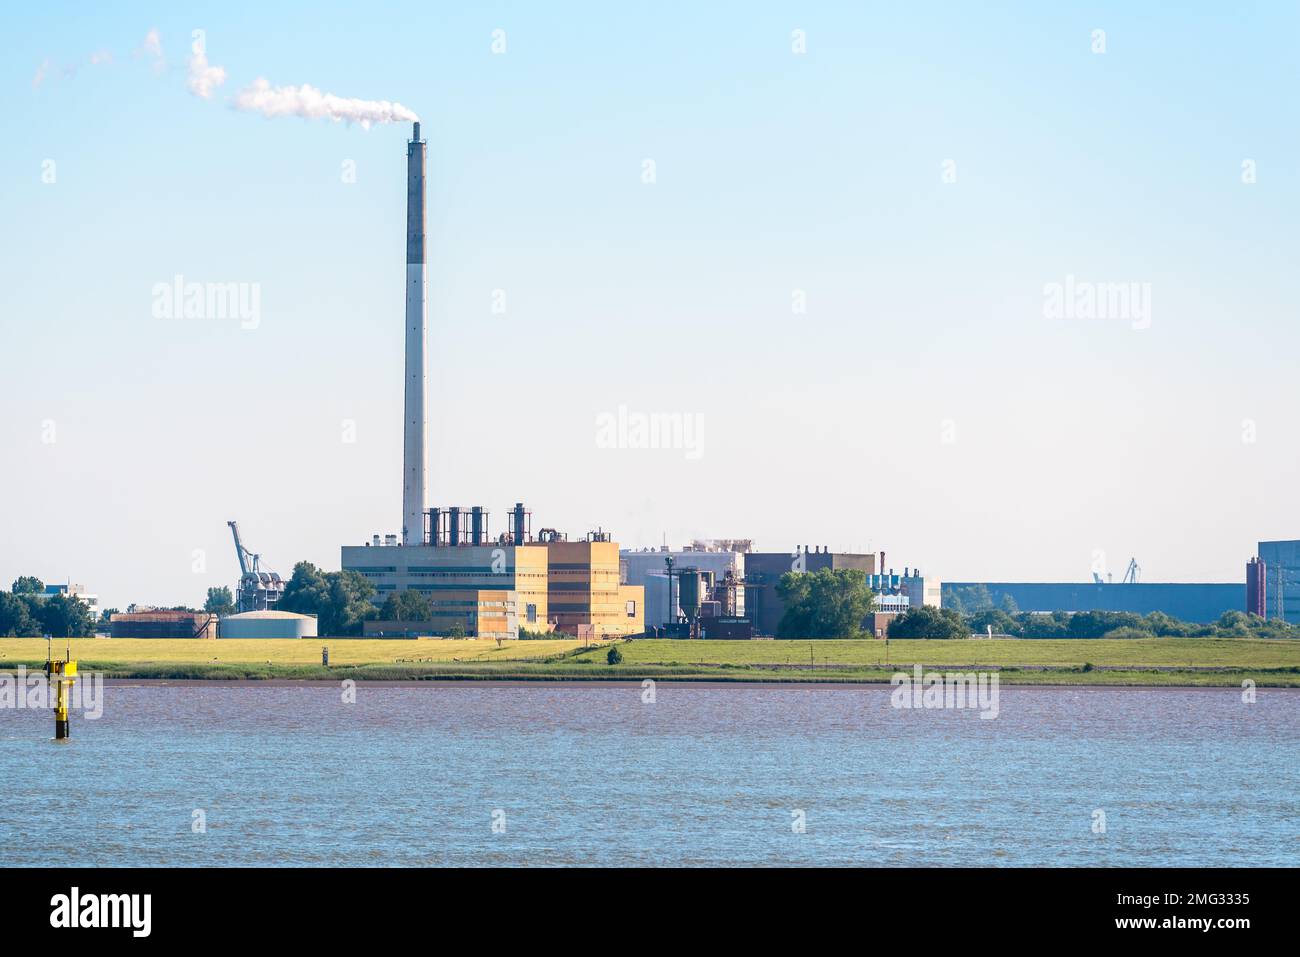 View of a riverside chemical factory with a tall smokestack belching out white smoke at sunset Stock Photo